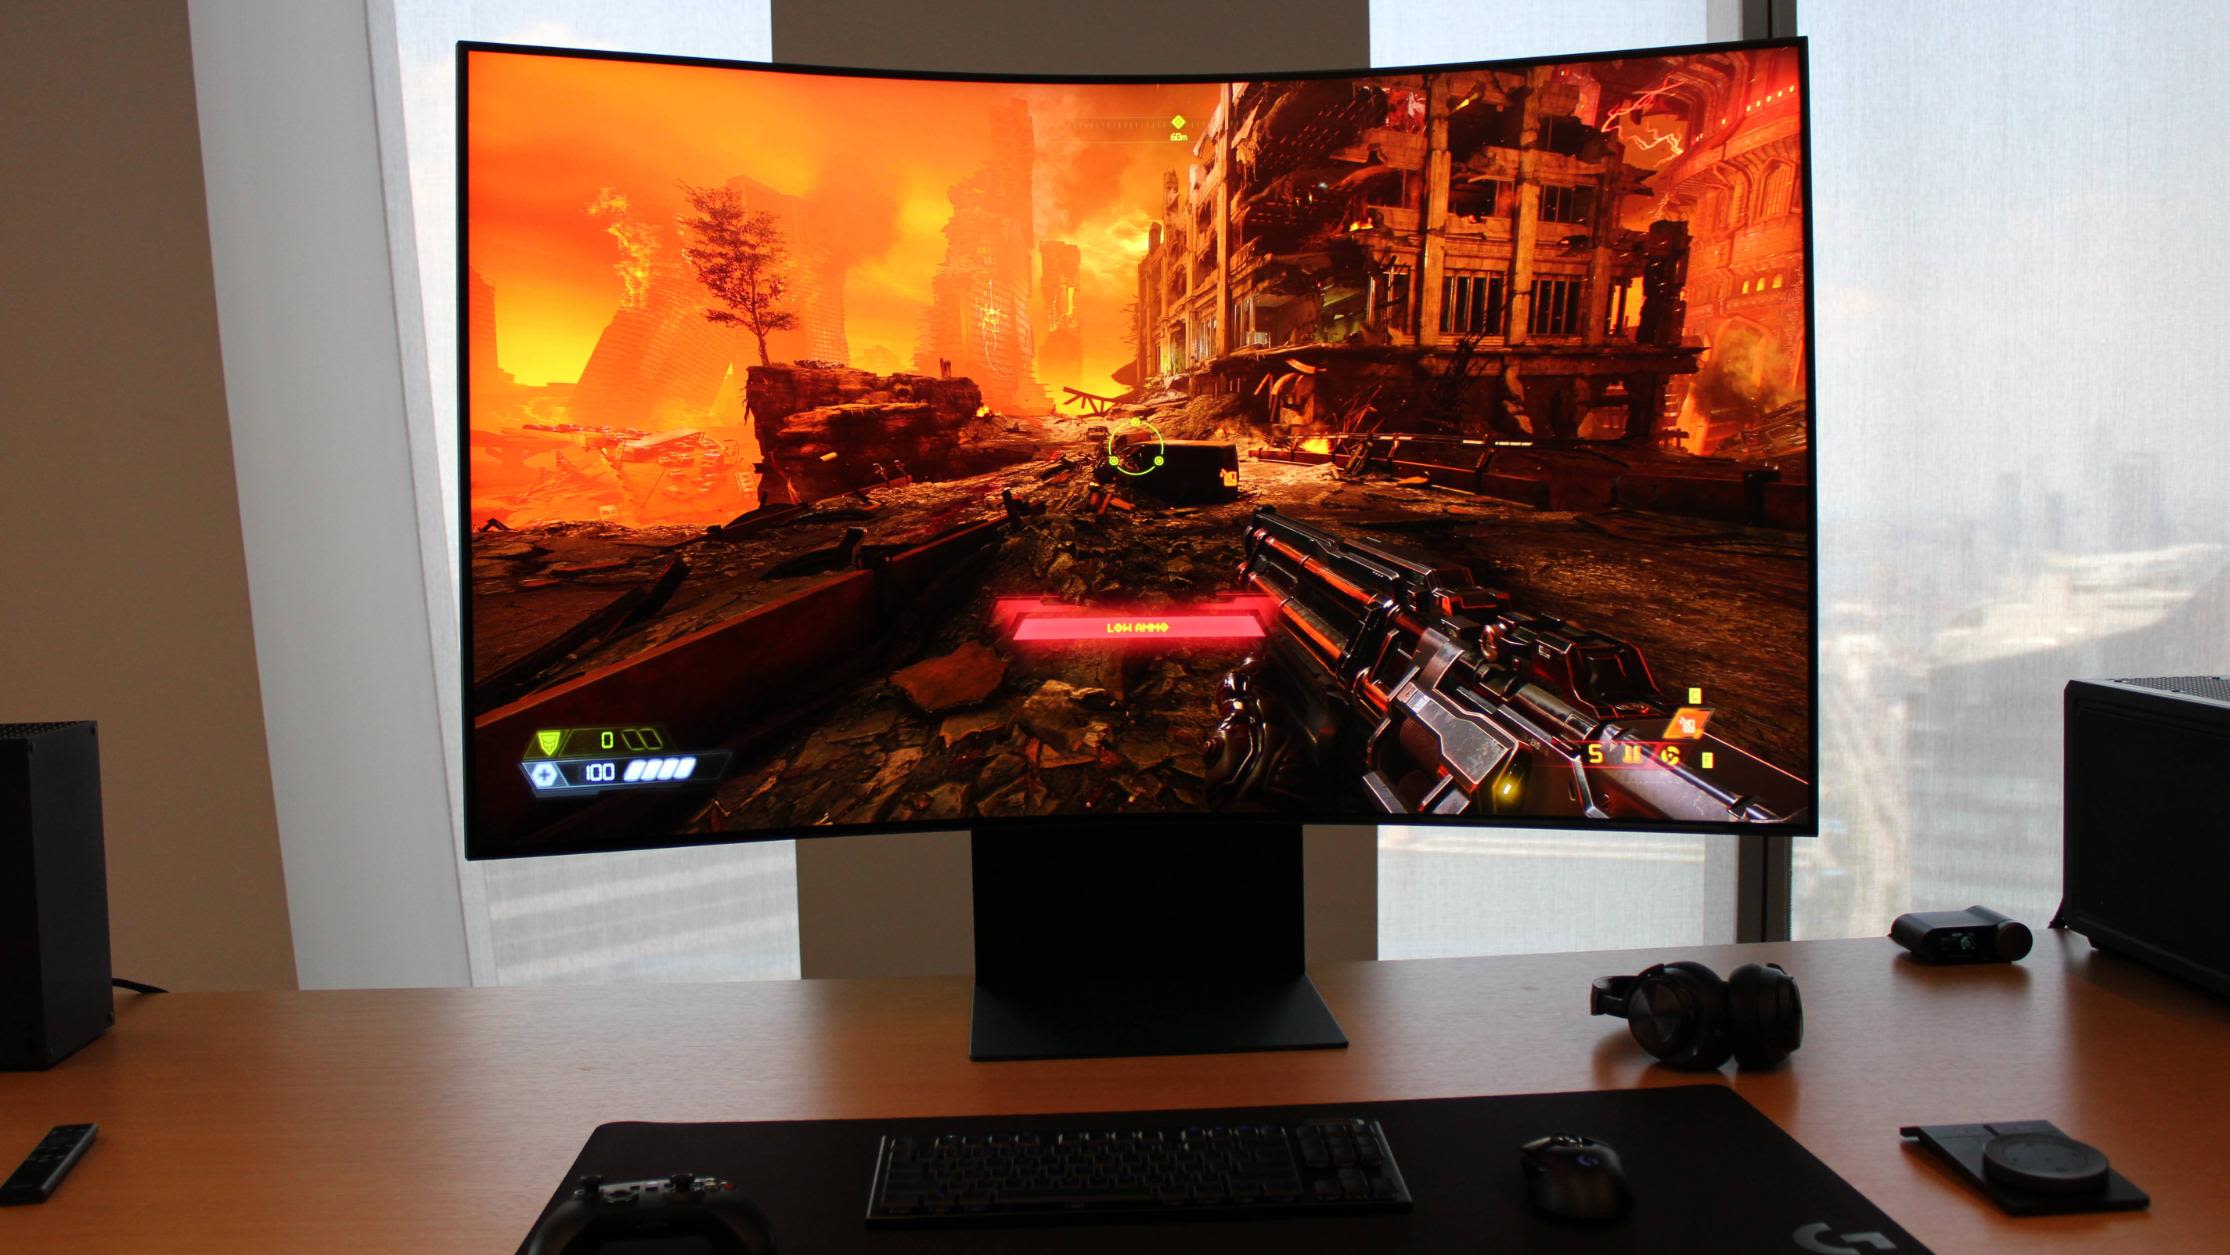 Samsung Odyssey Ark hands-on: Is this $3,499 curved gaming monitor